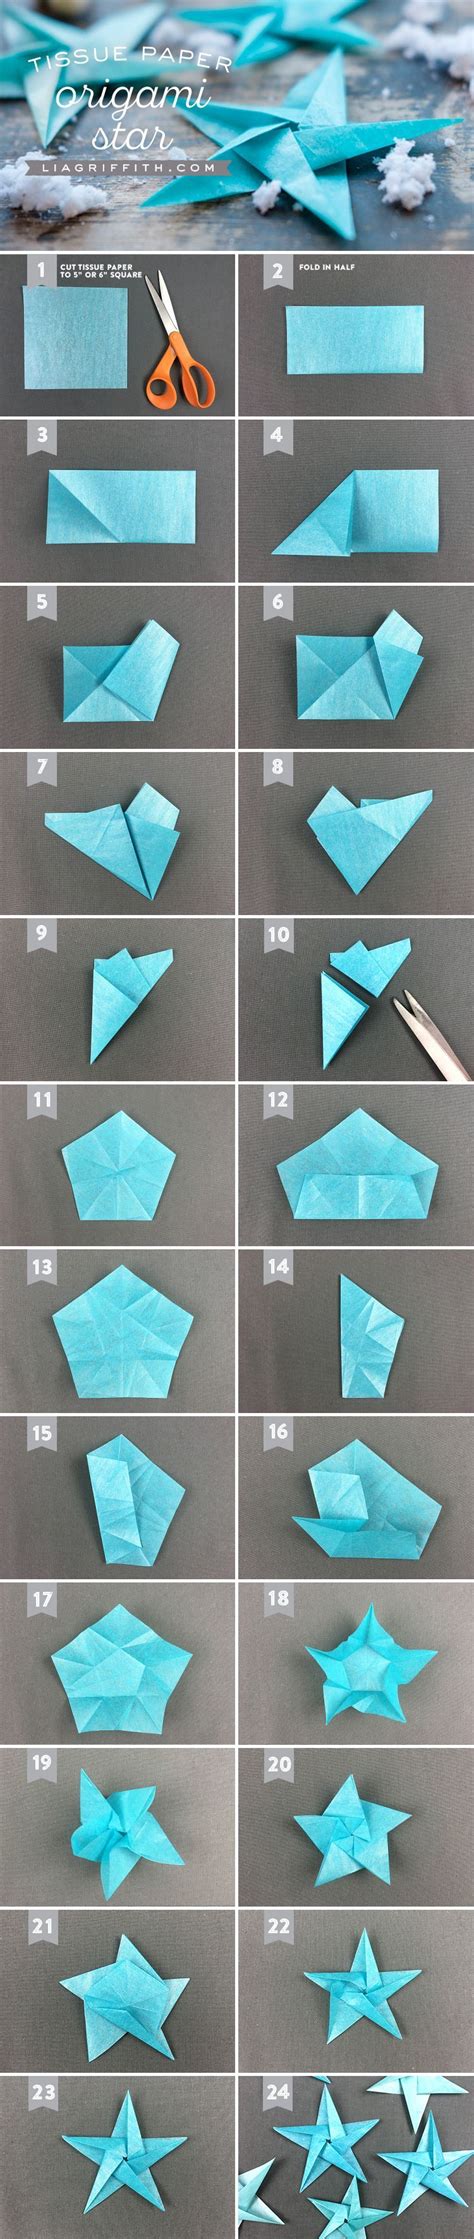 Money origami ninja star tutorial from dollar note a very fun way to throw your money around! How To Make A Origami Christmas Star With Money / Origami ...